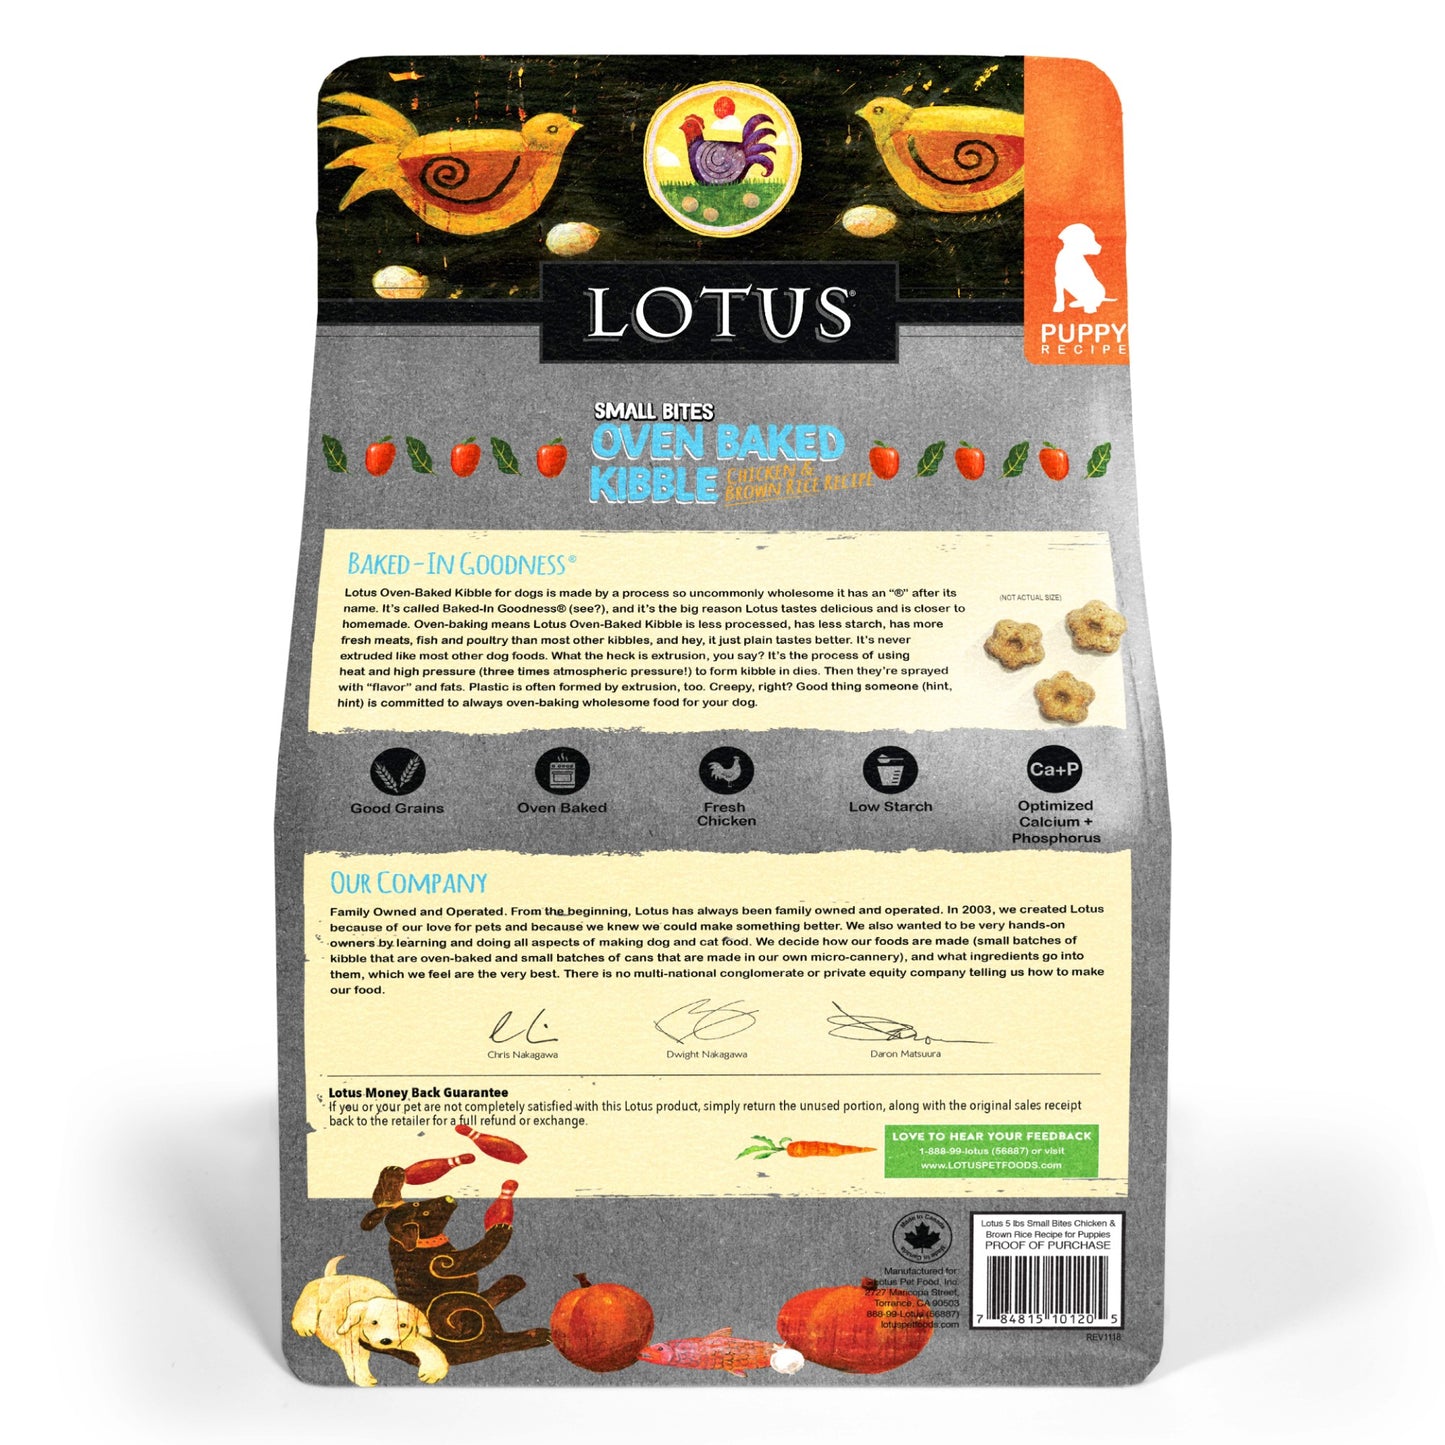 Lotus Small Bites Oven Baked Chicken Recipe Puppy Kibble